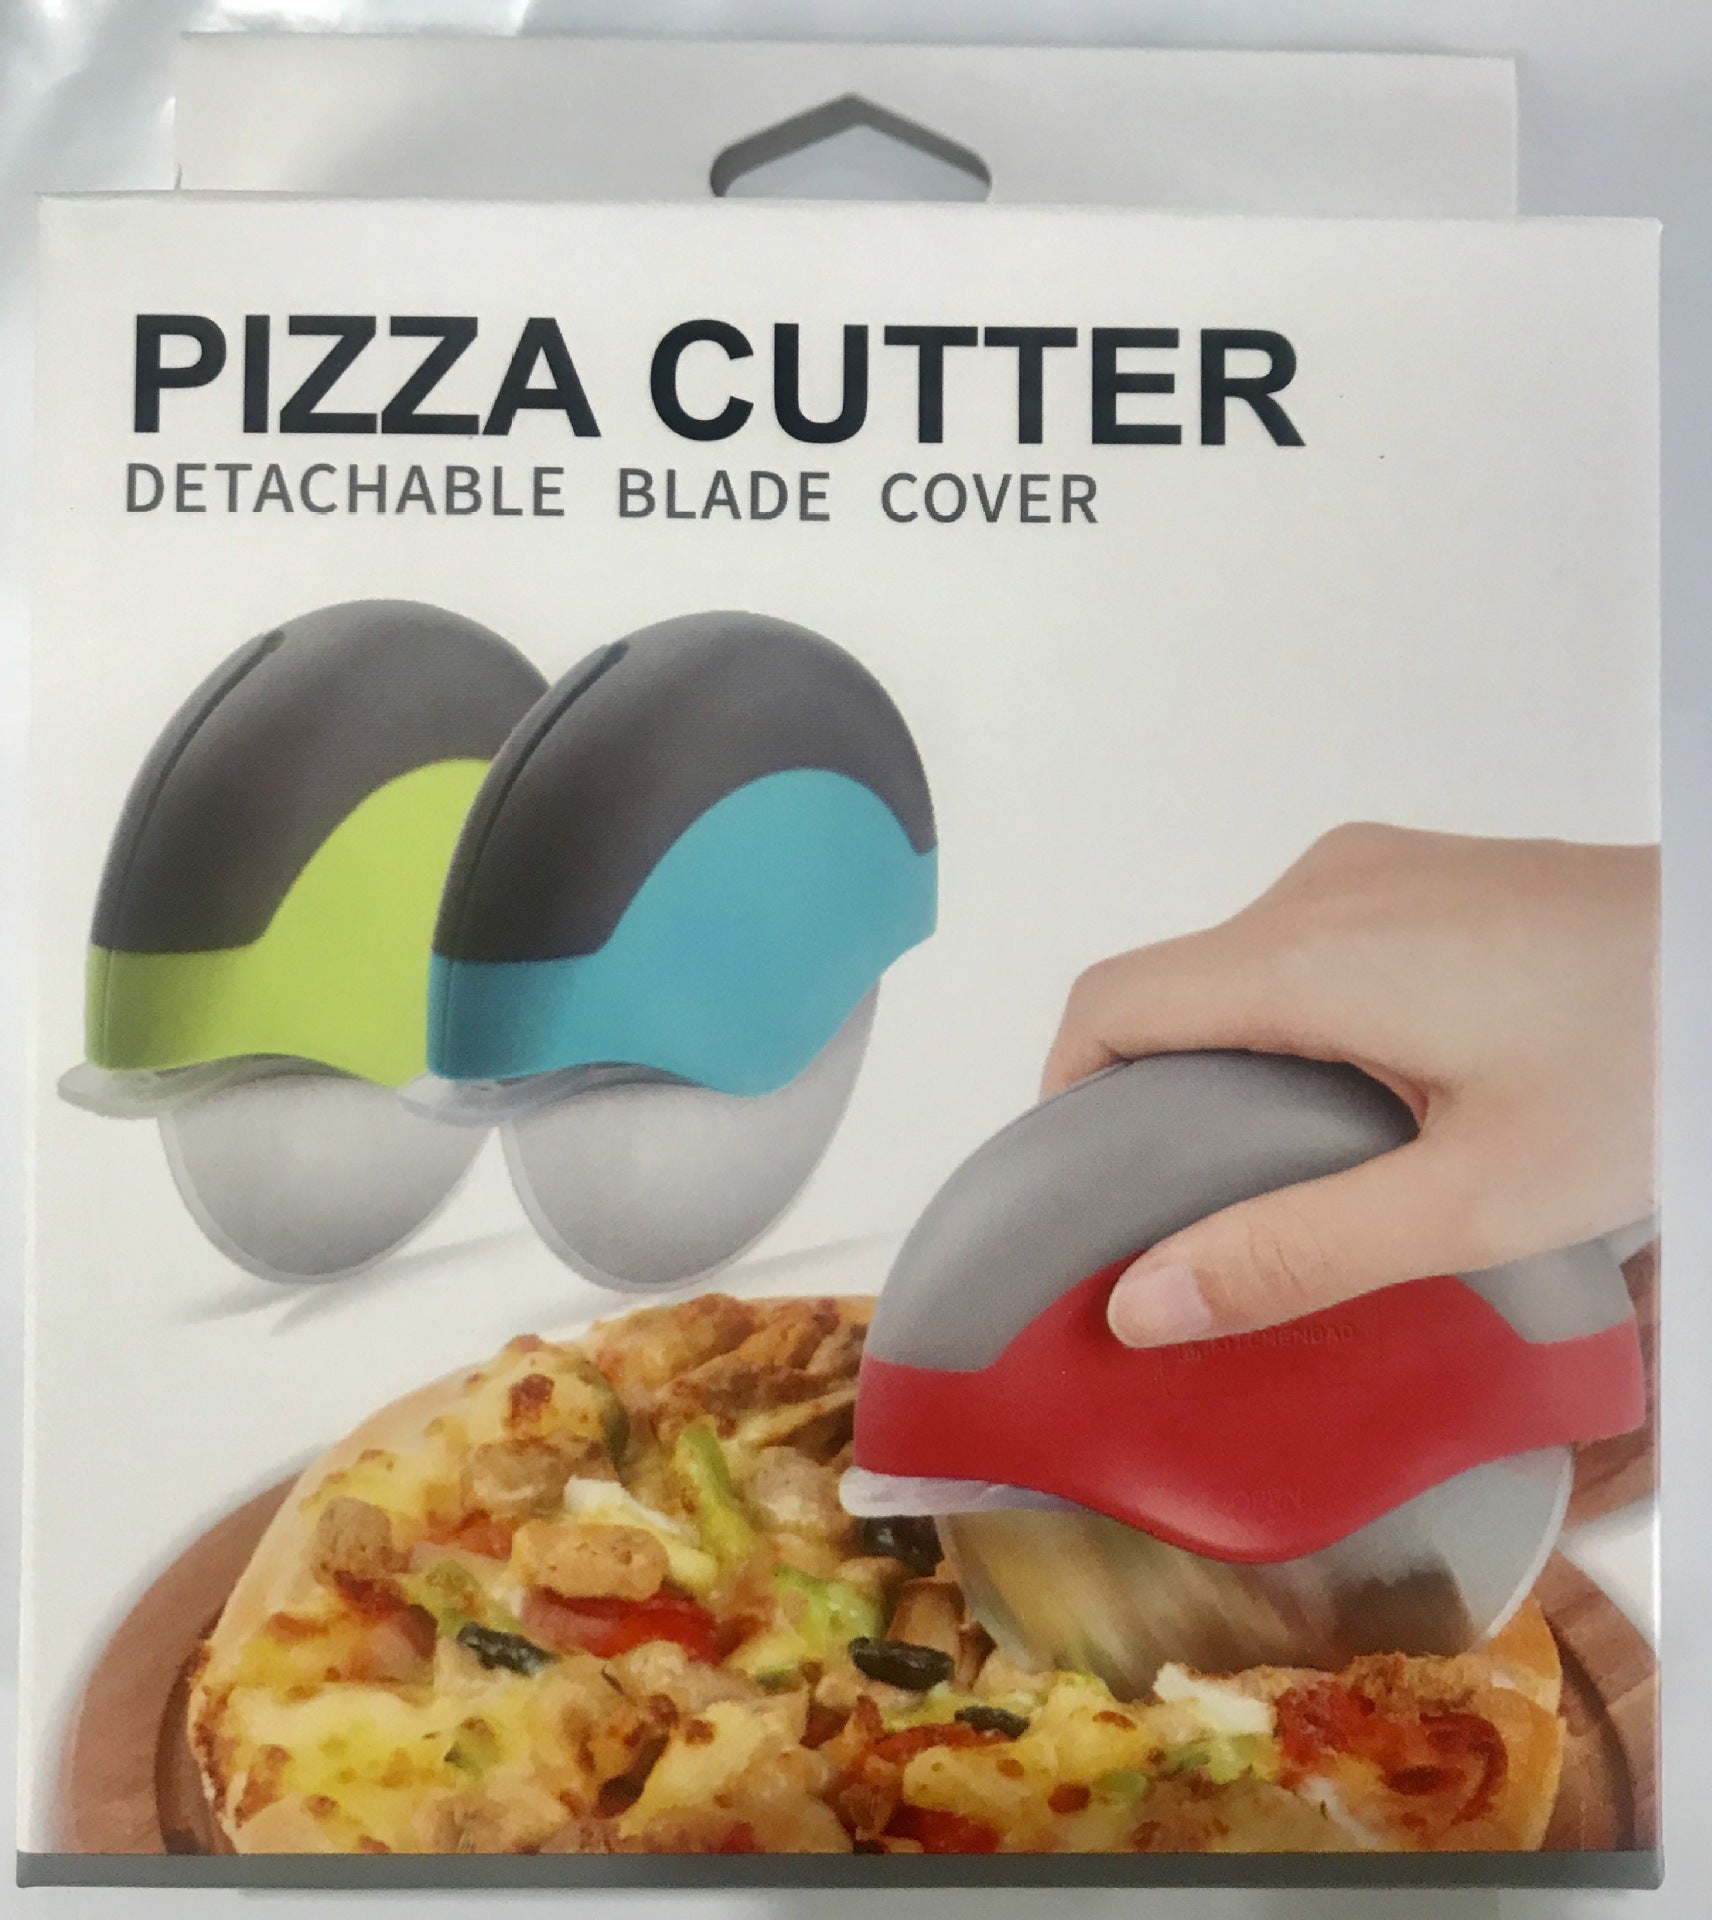 Stainless steel roller pizza cutter